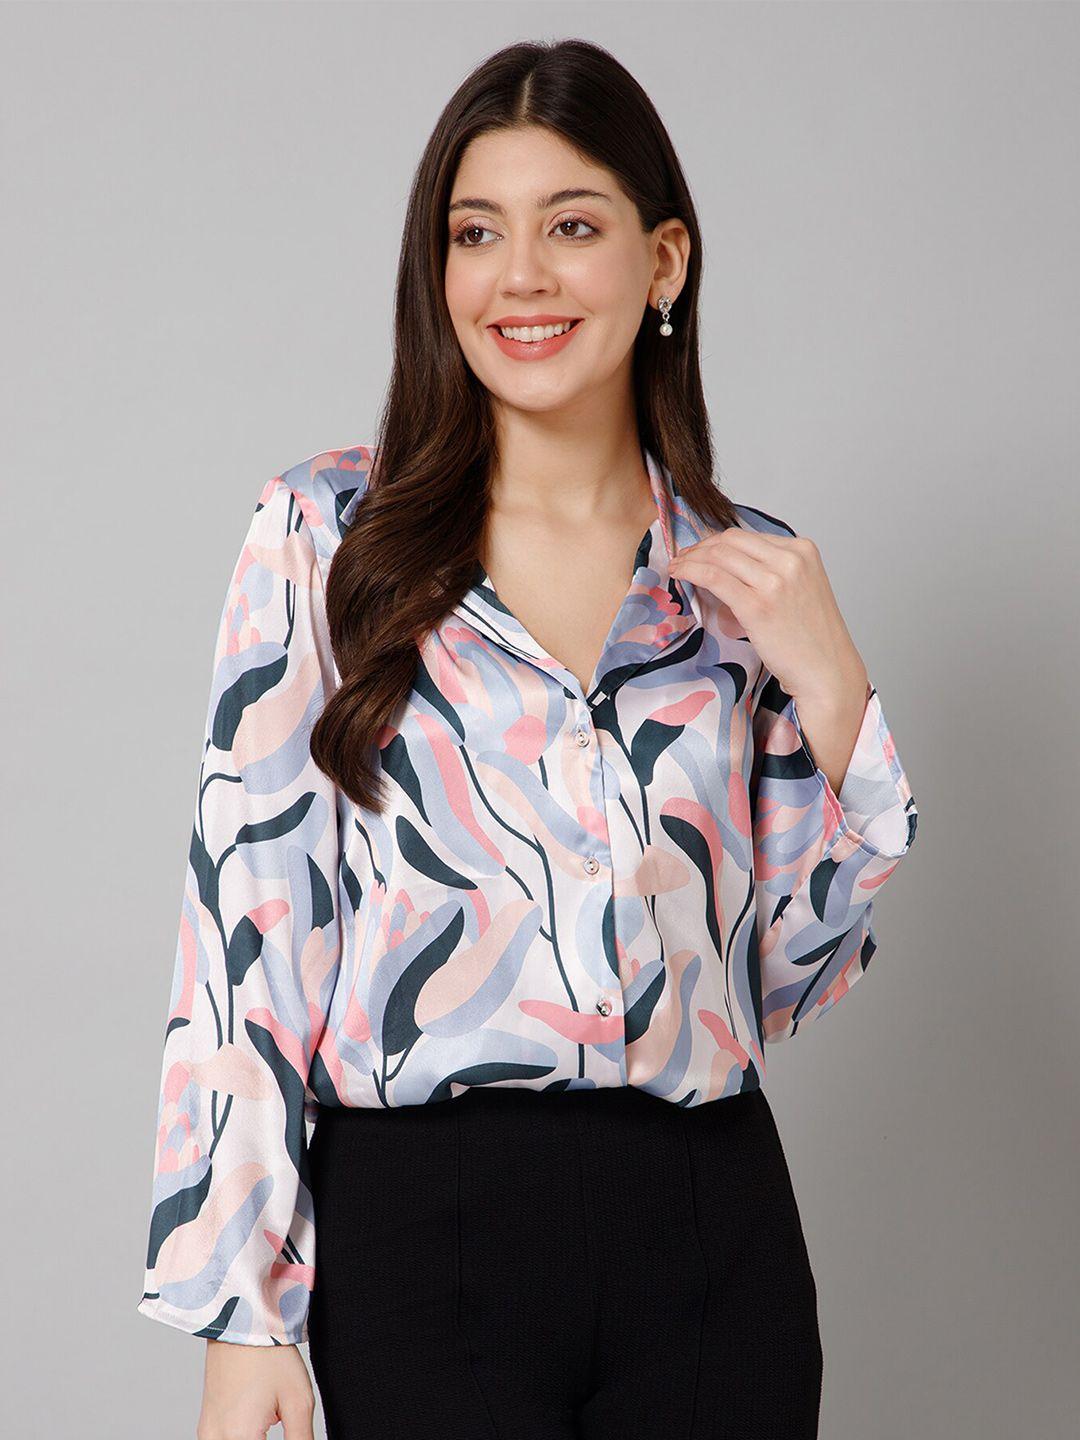 purys-relaxed-abstract-printed-satin-casual-shirt